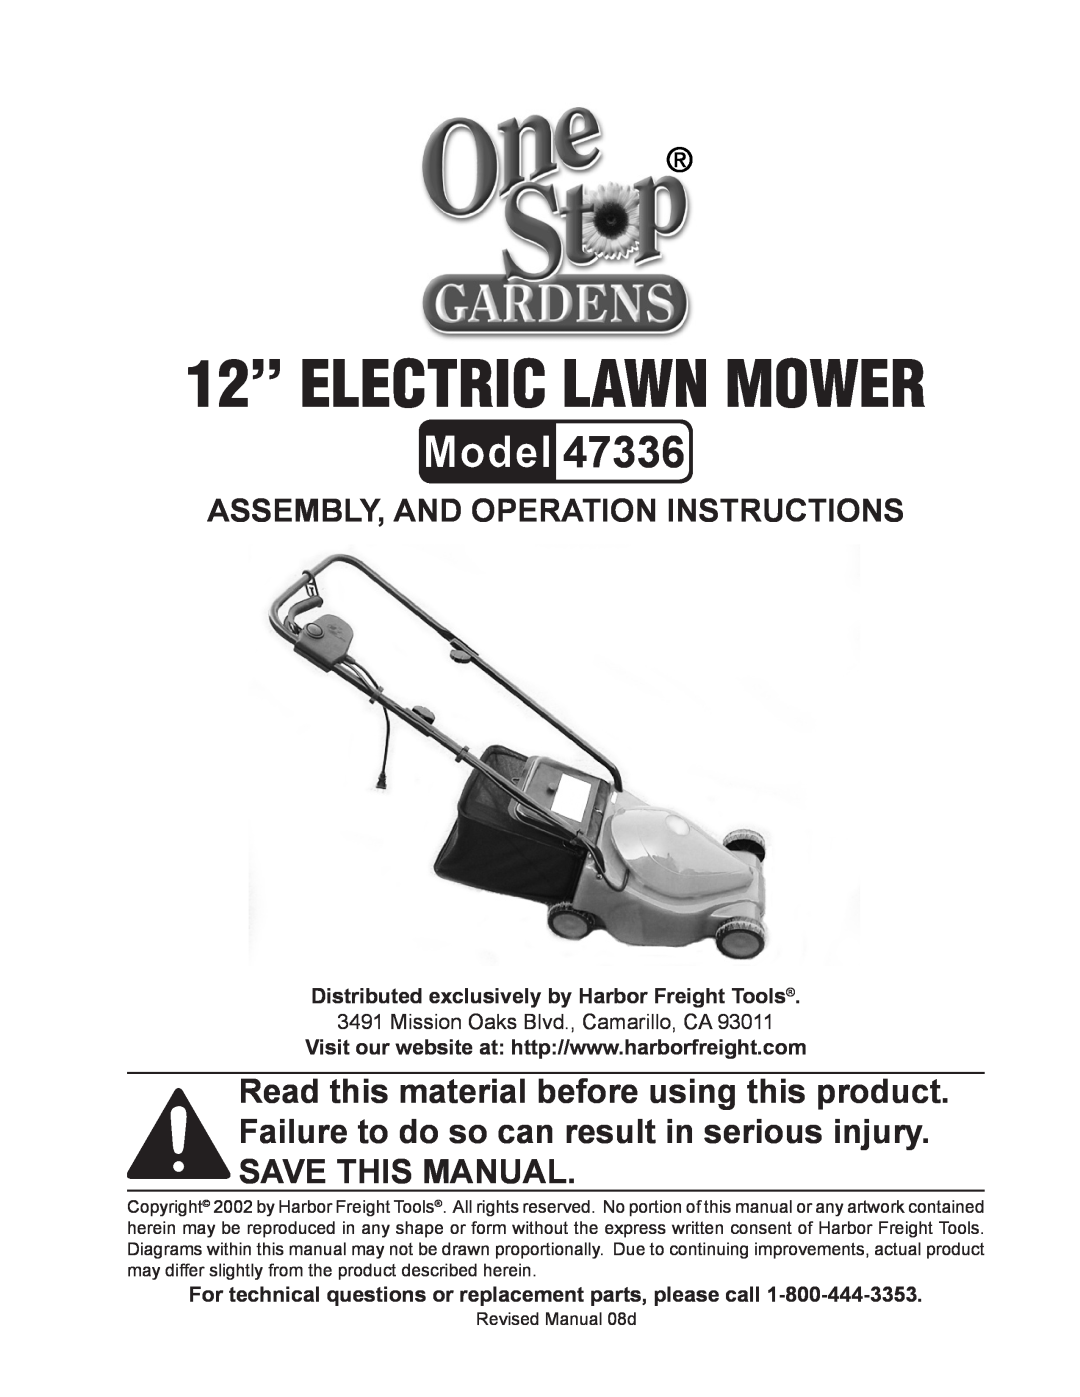 Harbor Freight Tools 47336 manual 12’’ ELECTRIC LAWN MOWER, Assembly, And Operation Instructions 